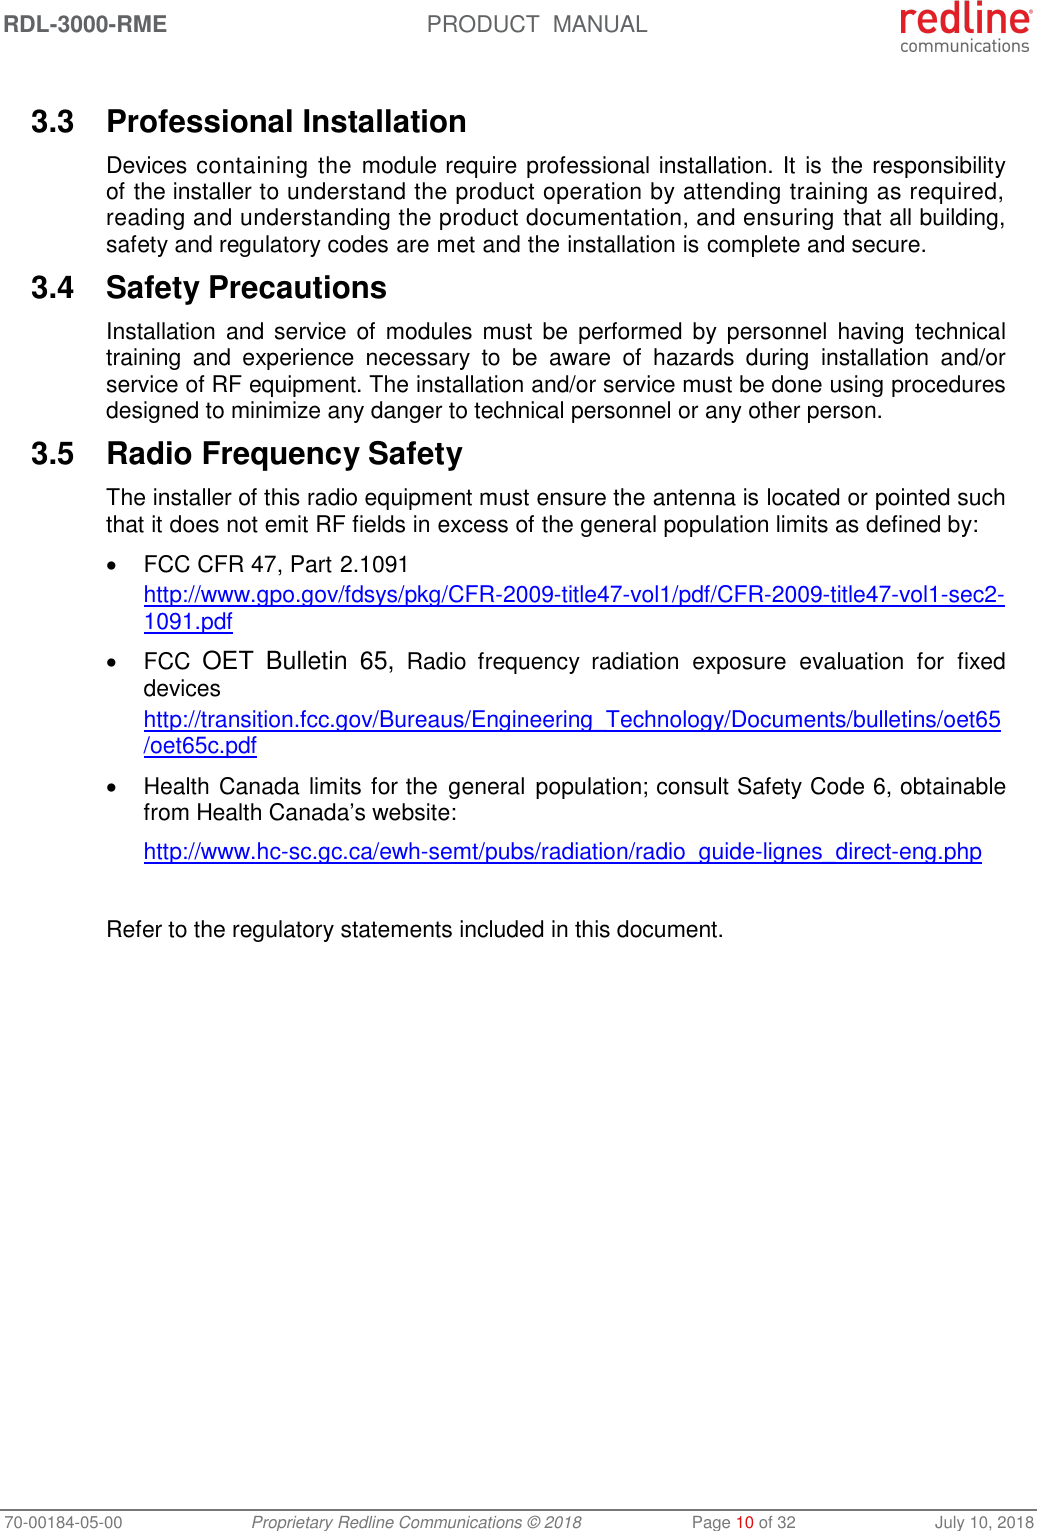 RDL-3000-RME  PRODUCT  MANUAL 70-00184-05-00 Proprietary Redline Communications © 2018  Page 10 of 32  July 10, 2018  3.3  Professional Installation Devices containing the module require professional installation. It is  the responsibility of the installer to understand the product operation by attending training as required, reading and understanding the product documentation, and ensuring that all building, safety and regulatory codes are met and the installation is complete and secure. 3.4  Safety Precautions  Installation  and  service of  modules  must  be  performed by  personnel  having  technical training  and  experience  necessary  to  be  aware  of  hazards  during  installation  and/or service of RF equipment. The installation and/or service must be done using procedures designed to minimize any danger to technical personnel or any other person.  3.5  Radio Frequency Safety The installer of this radio equipment must ensure the antenna is located or pointed such that it does not emit RF fields in excess of the general population limits as defined by:   FCC CFR 47, Part 2.1091 http://www.gpo.gov/fdsys/pkg/CFR-2009-title47-vol1/pdf/CFR-2009-title47-vol1-sec2-1091.pdf   FCC OET  Bulletin  65,  Radio  frequency  radiation  exposure  evaluation  for  fixed devices http://transition.fcc.gov/Bureaus/Engineering_Technology/Documents/bulletins/oet65/oet65c.pdf   Health Canada limits for the  general  population; consult Safety Code 6, obtainable from Health Canada’s website: http://www.hc-sc.gc.ca/ewh-semt/pubs/radiation/radio_guide-lignes_direct-eng.php  Refer to the regulatory statements included in this document. 